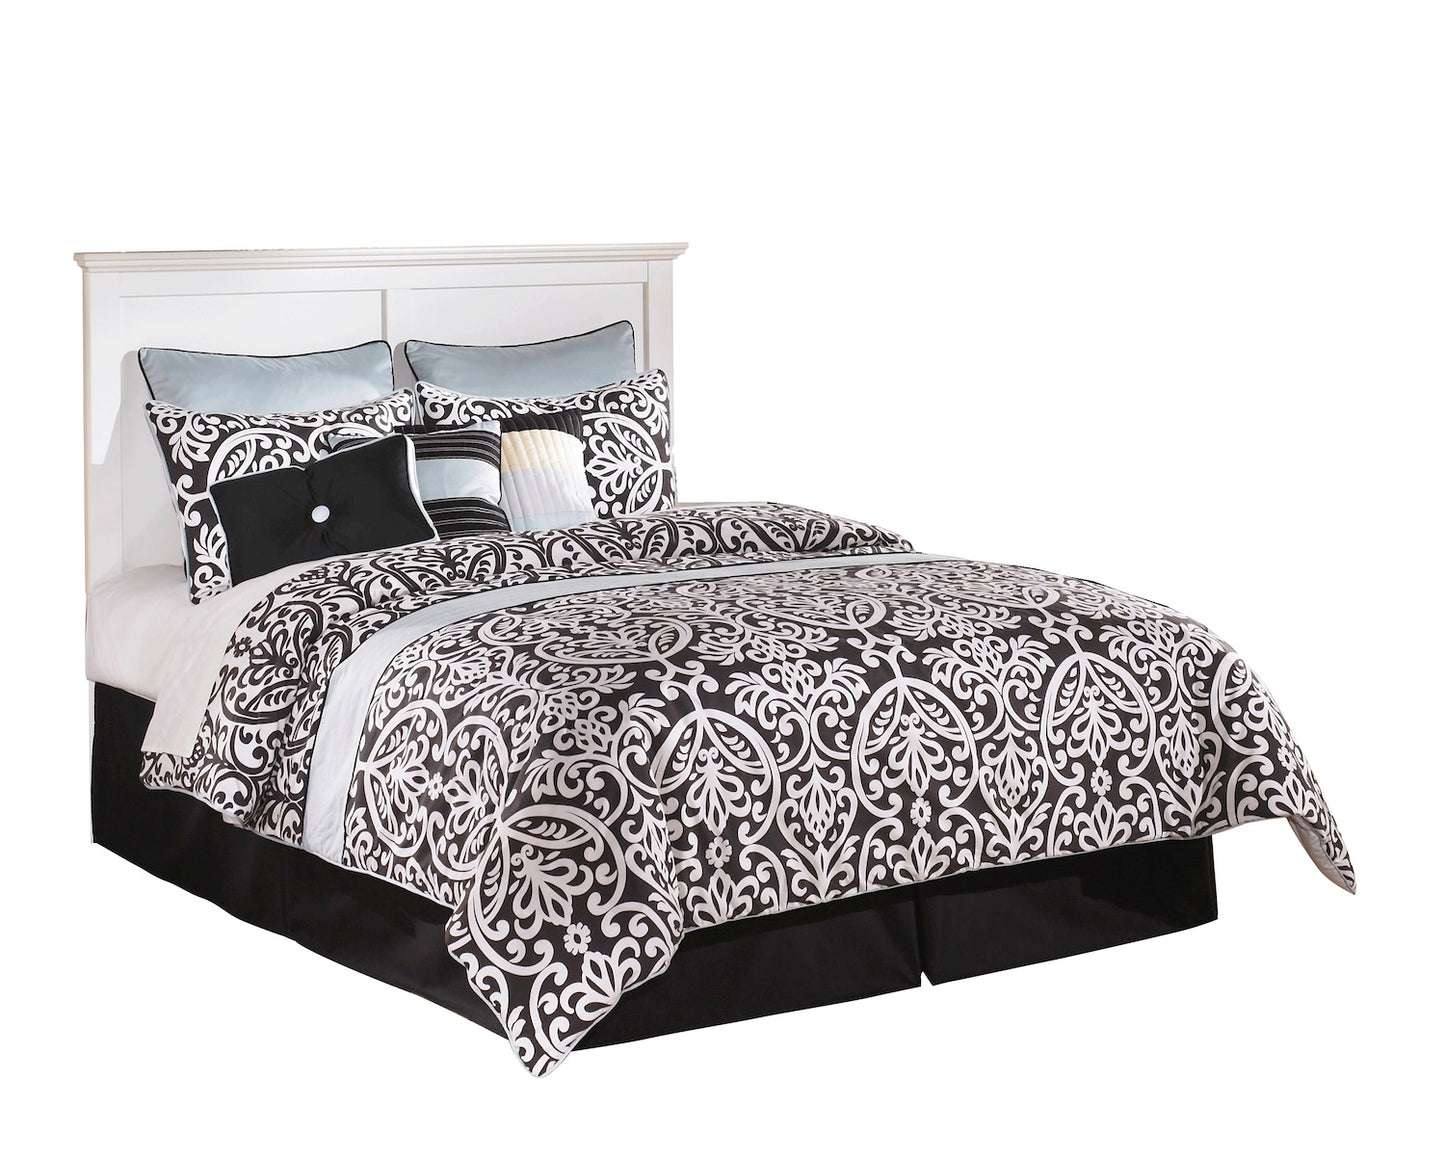 Ashley Bostwick Shoals 5 PC Queen Panel Headboard  Bedroom Set with two Nightstands in White - The Furniture Space.